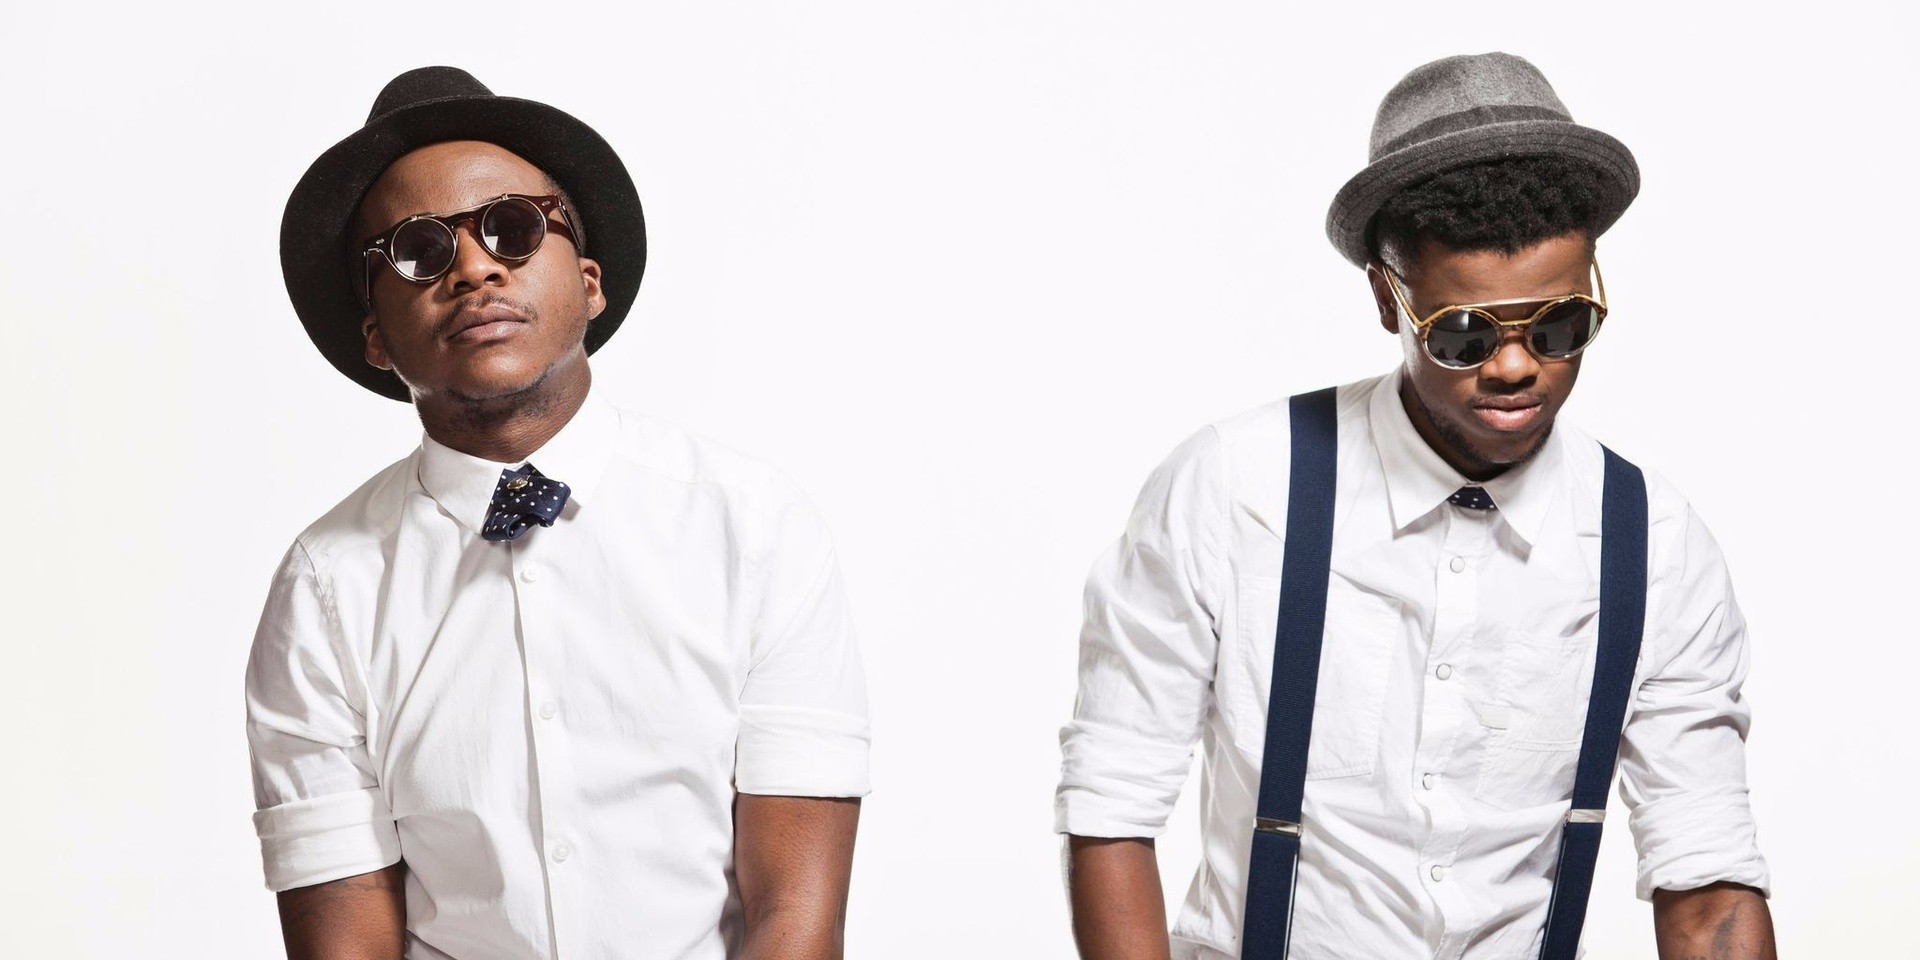 South African house duo Black Motion set for live showcase at Kilo Lounge